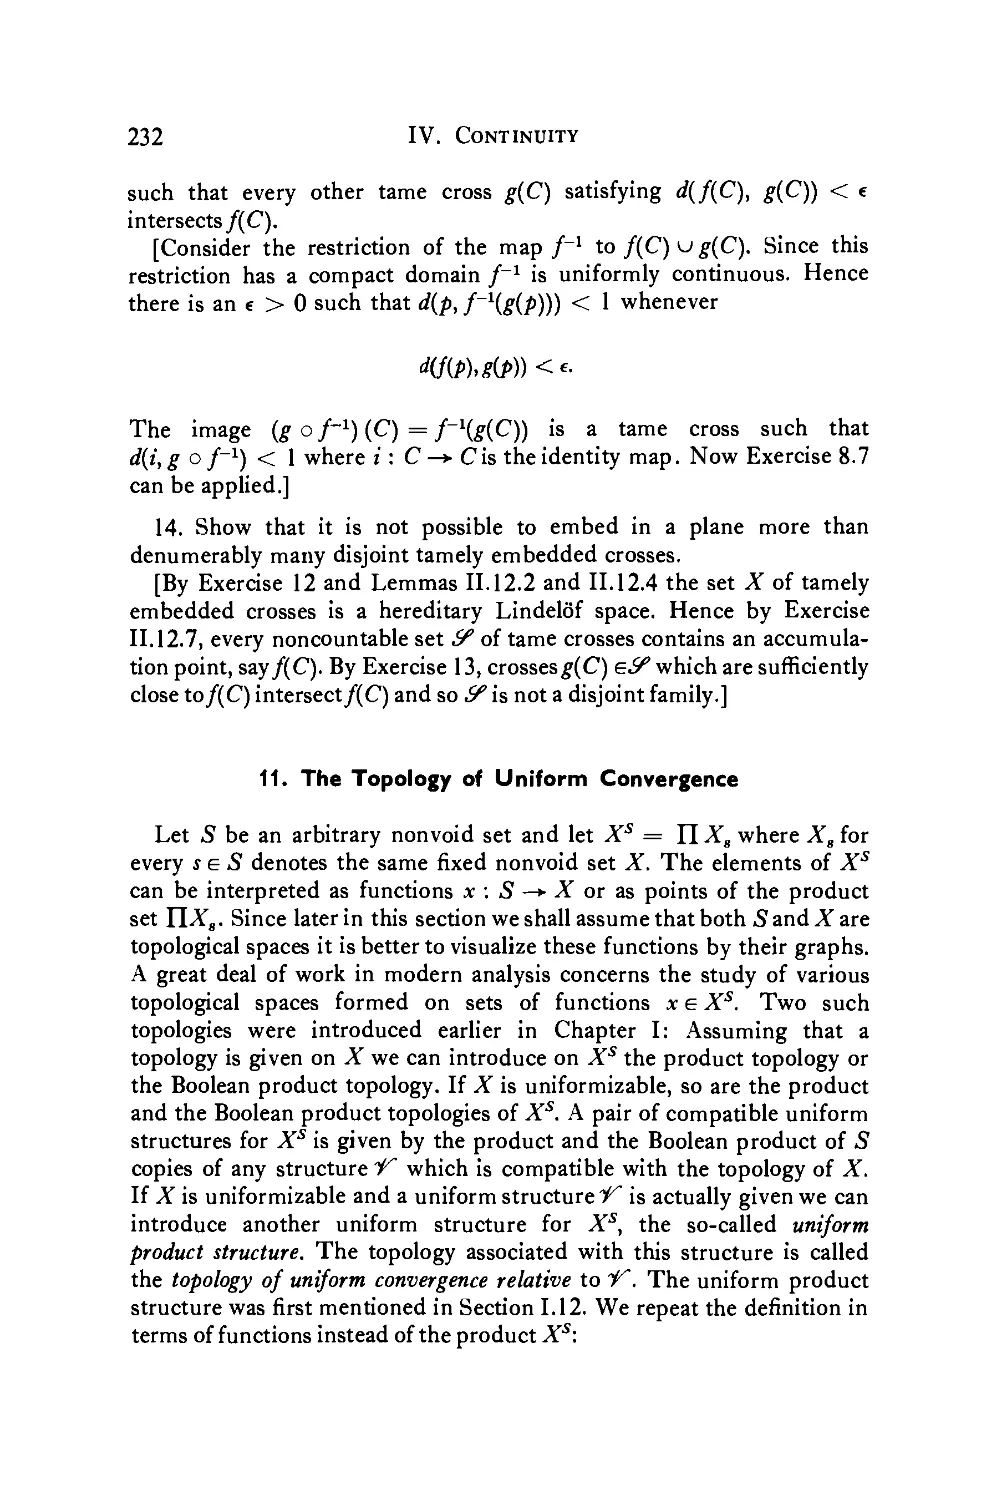 11. The Topology of Uniform Convergence